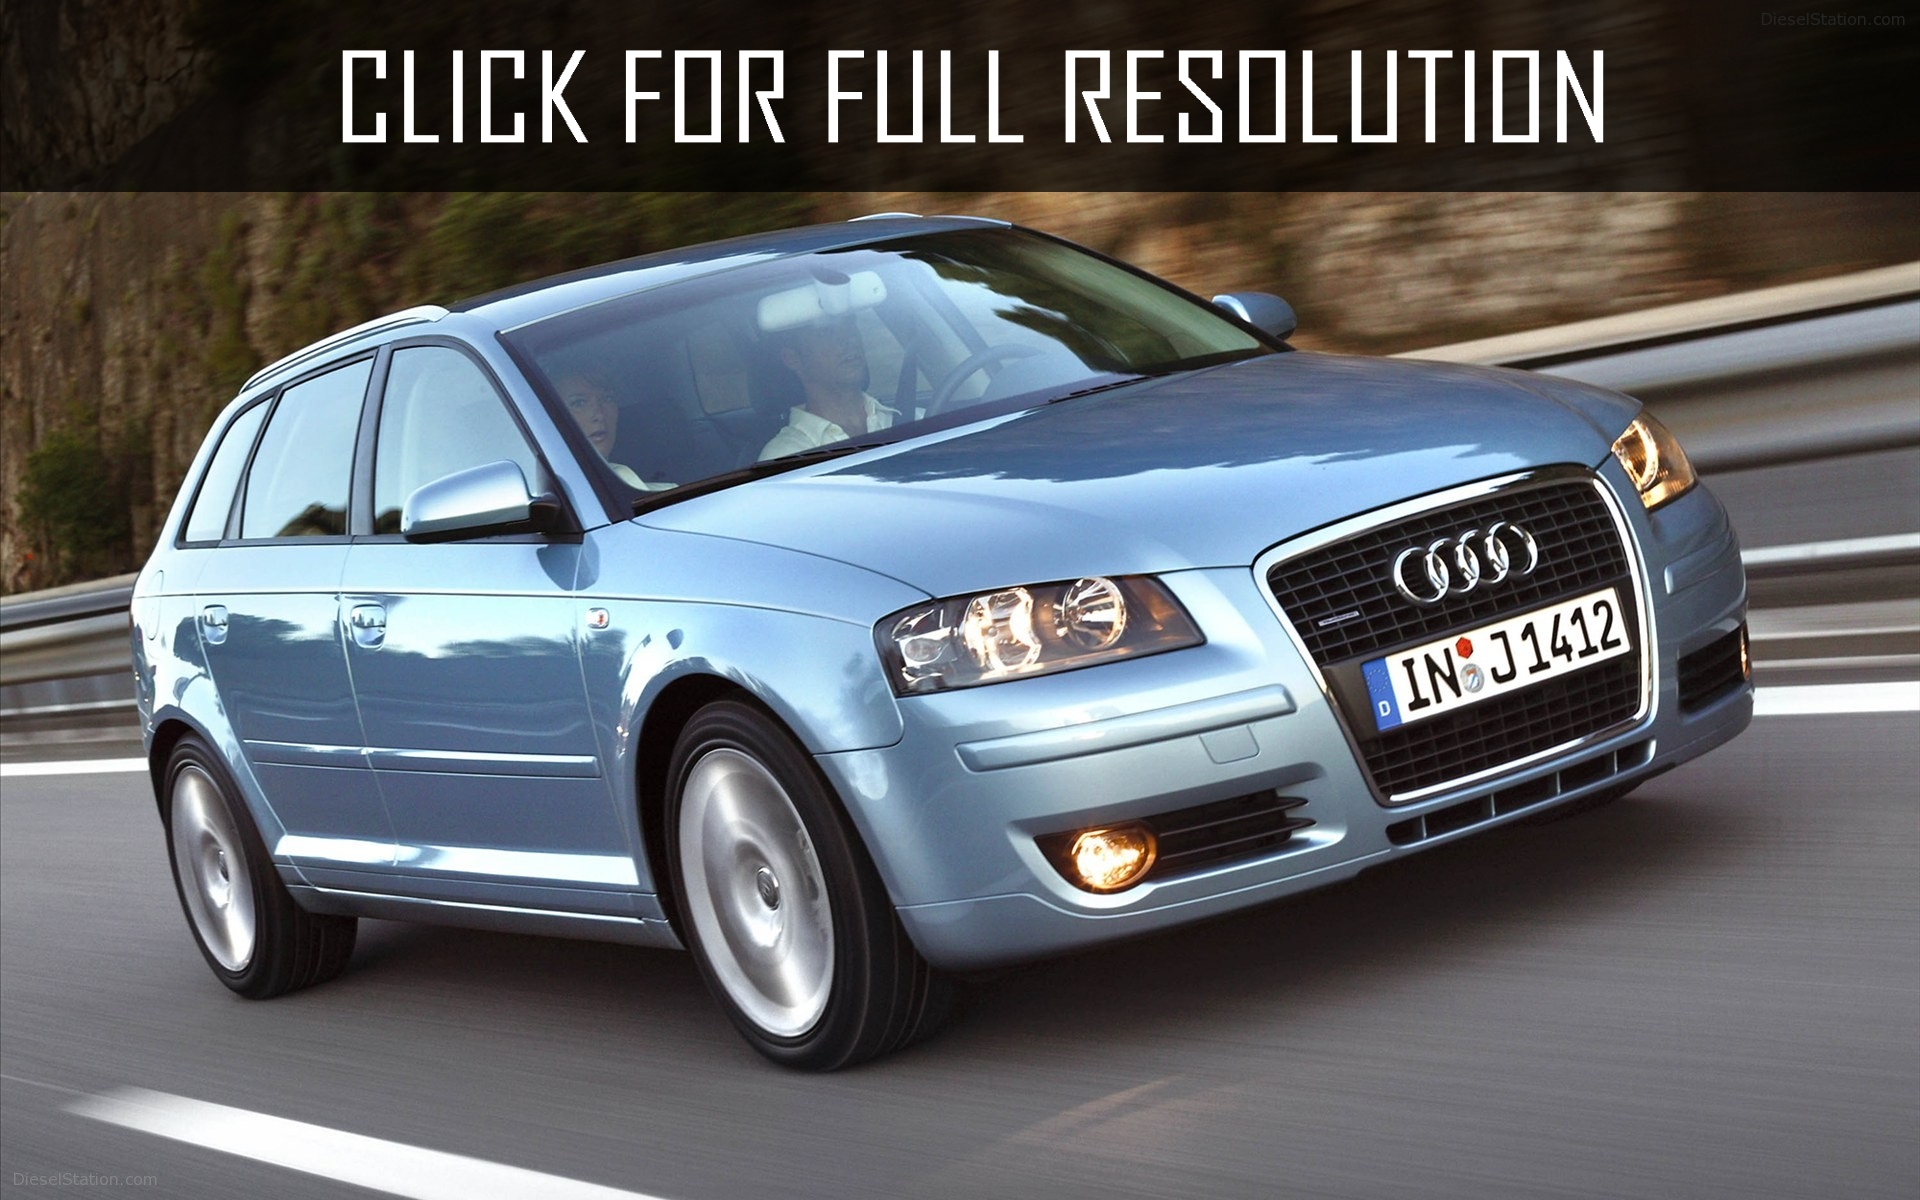 2004 Audi A3 best image gallery - share download